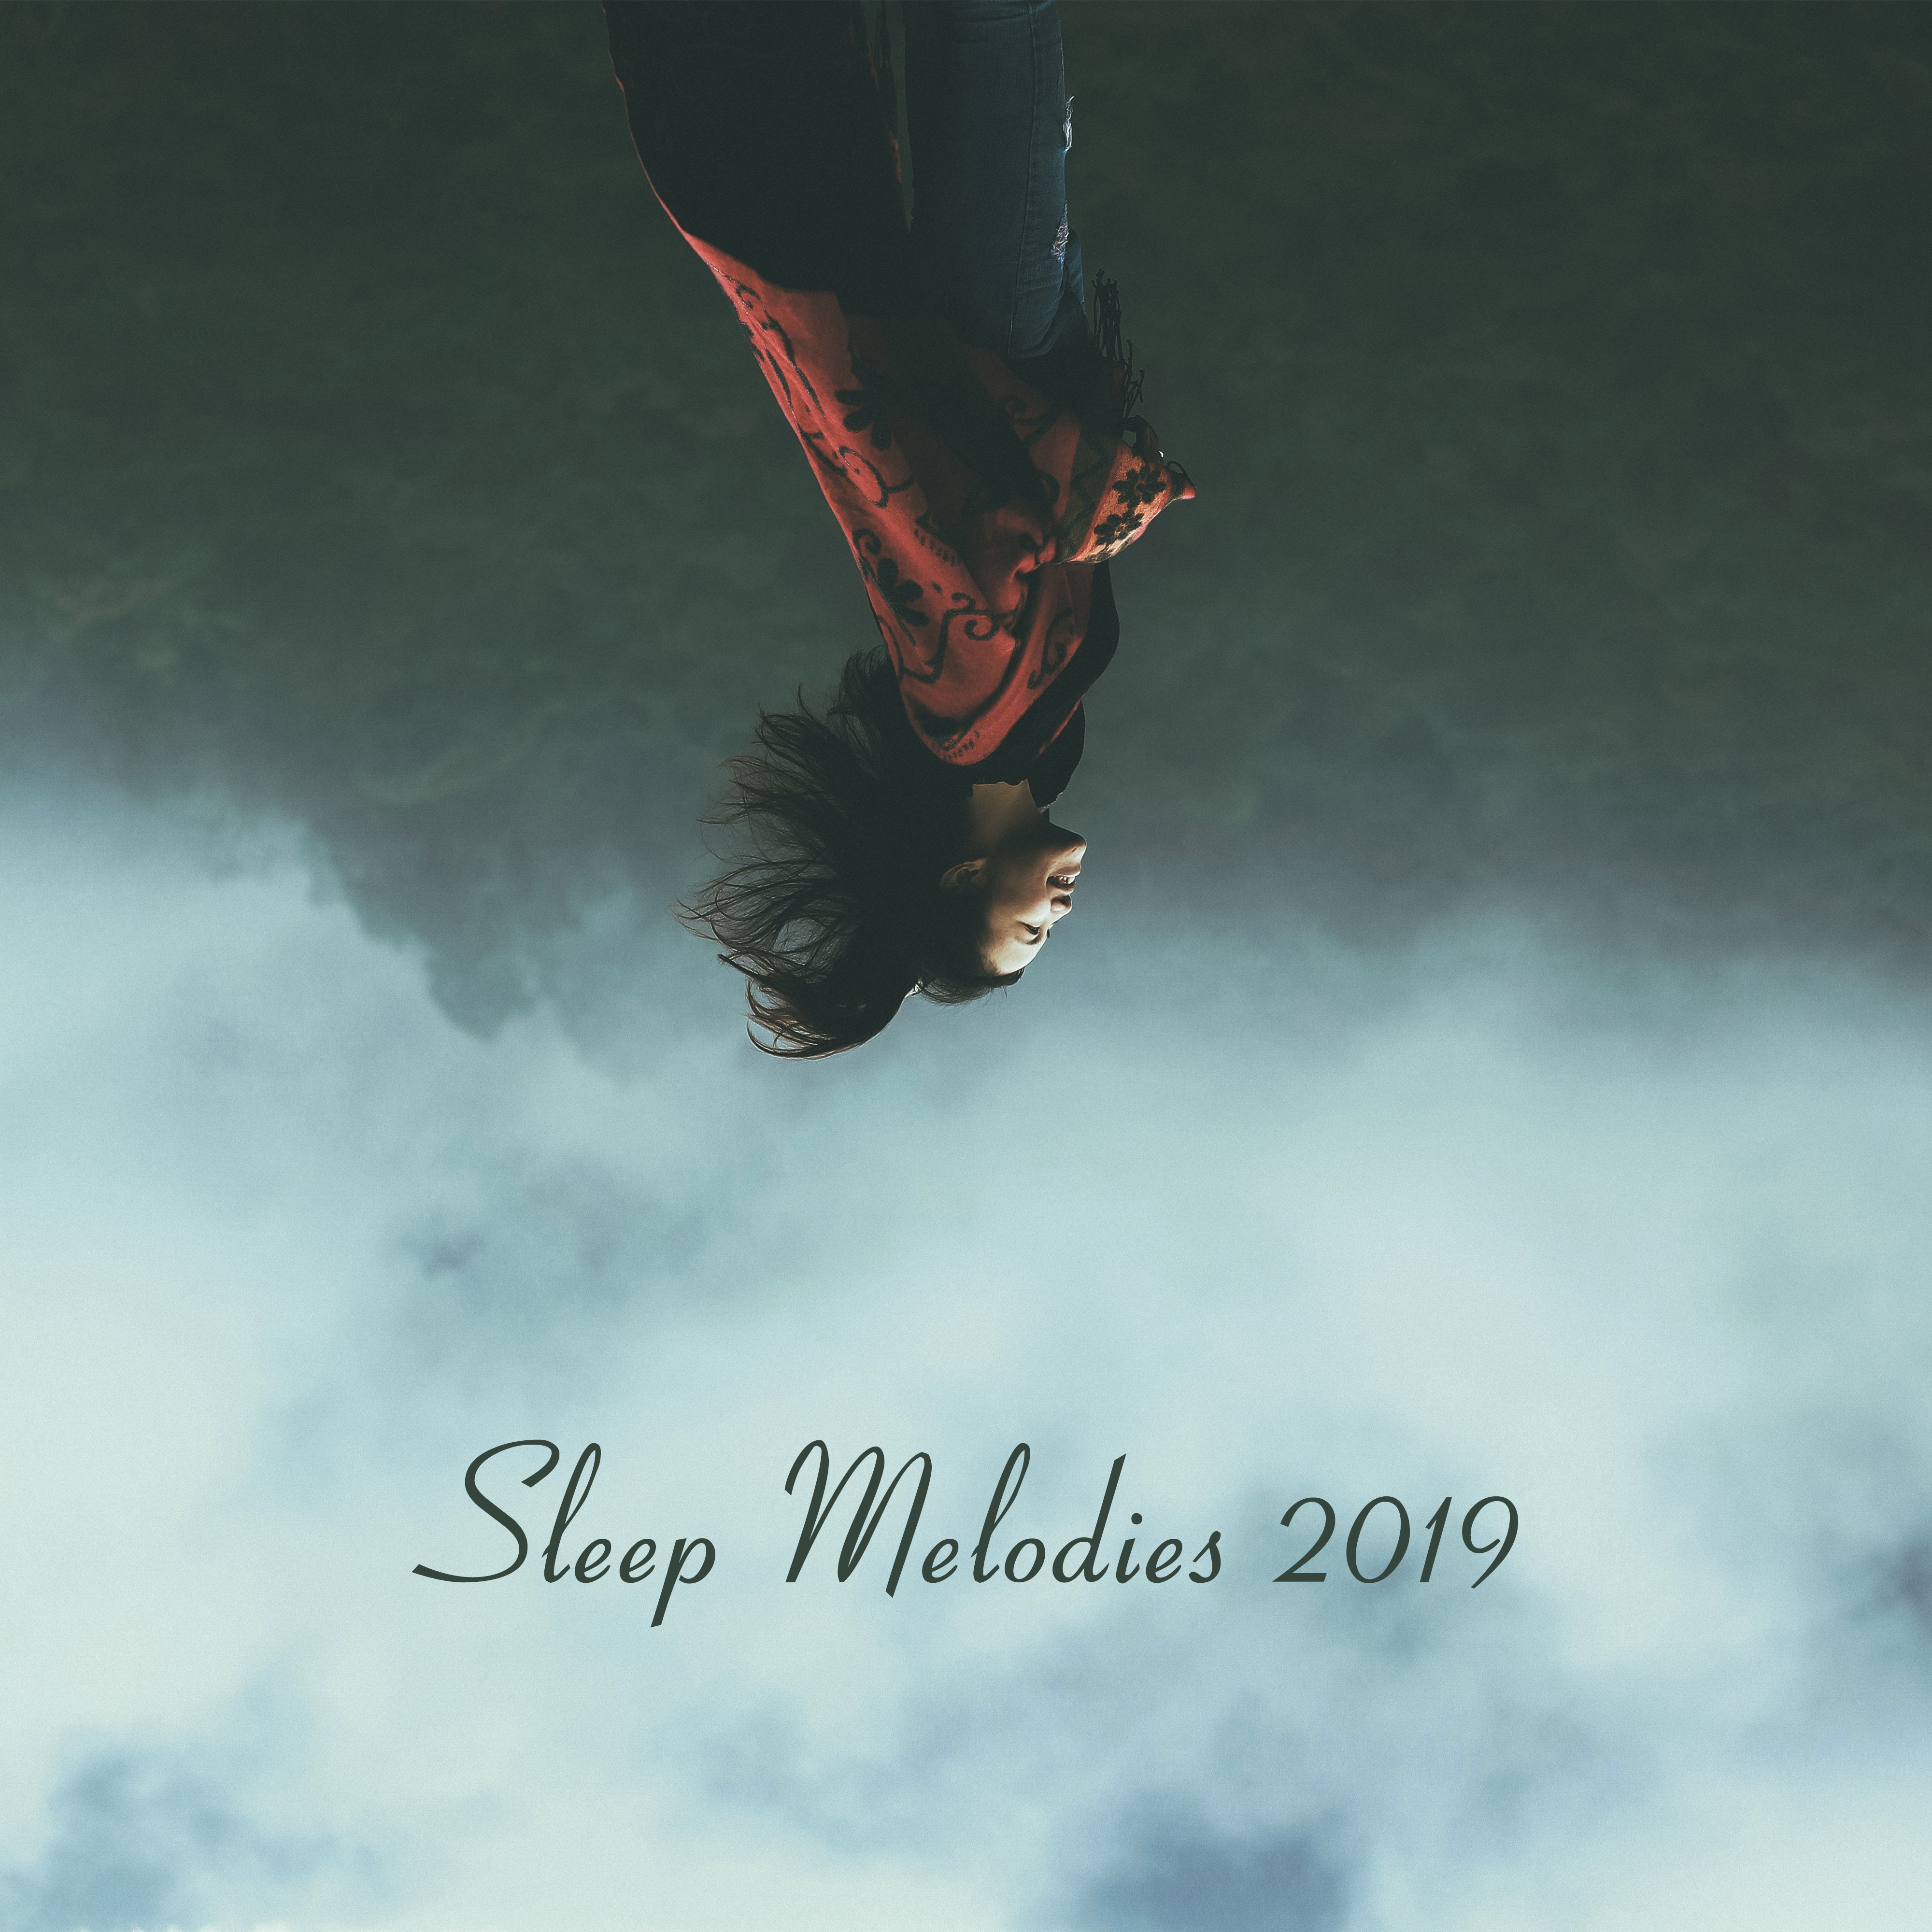 Sleep Melodies 2019 – Relaxing Music Therapy, Stress Relief, Calming Sounds for Relaxation, Sleep, Meditation, Soft Lullabies at Night